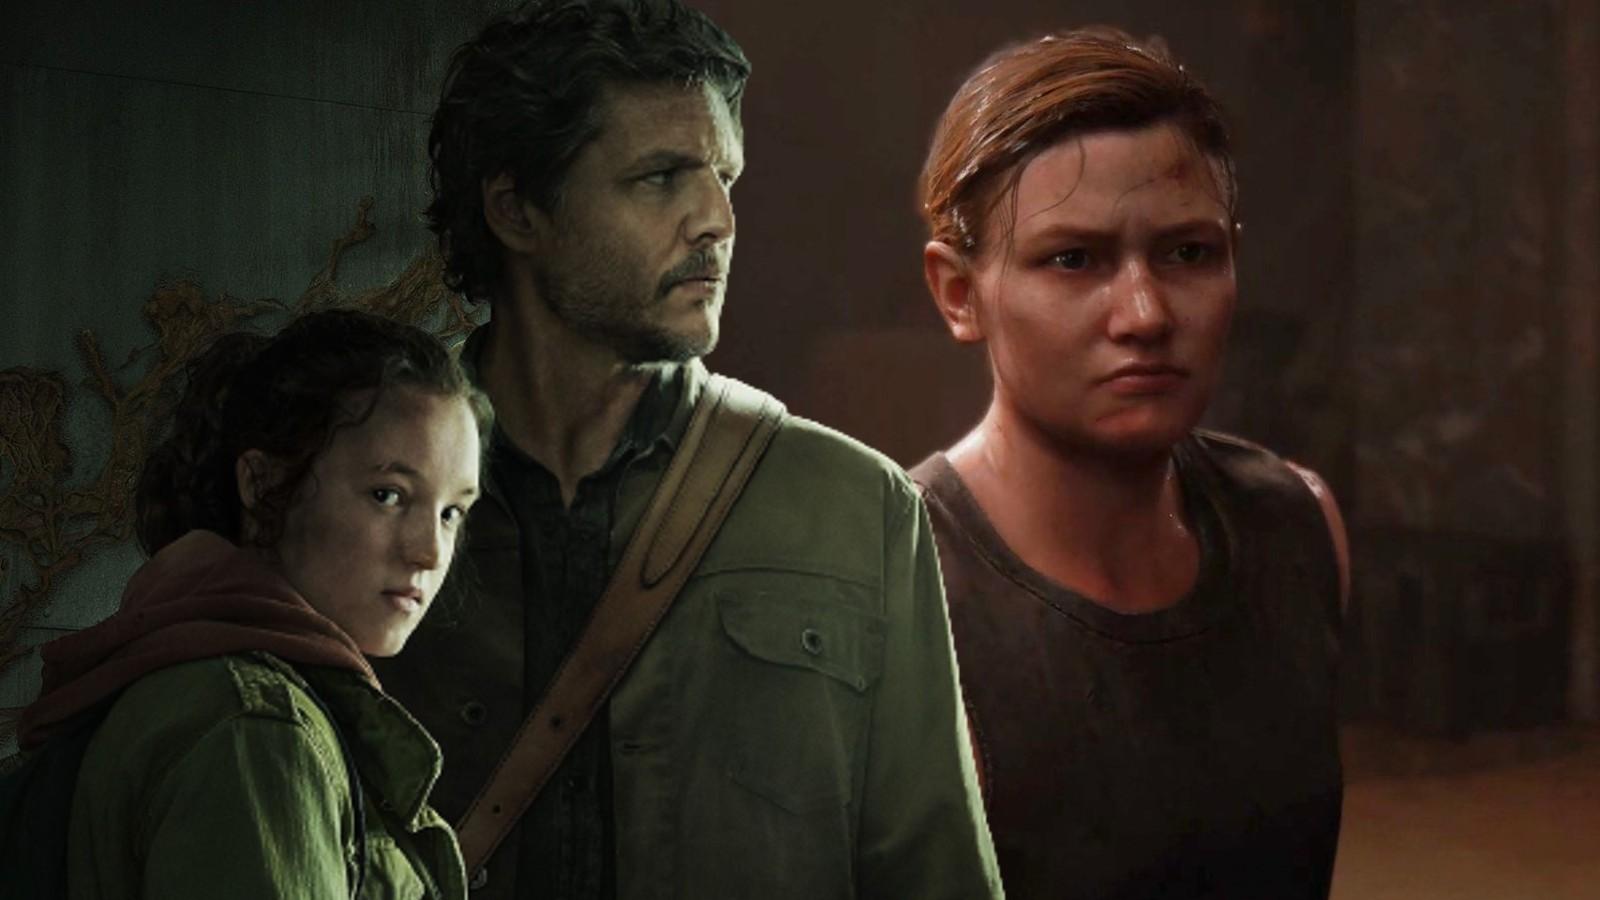 The Last of Us' season 2: Everything we know so far